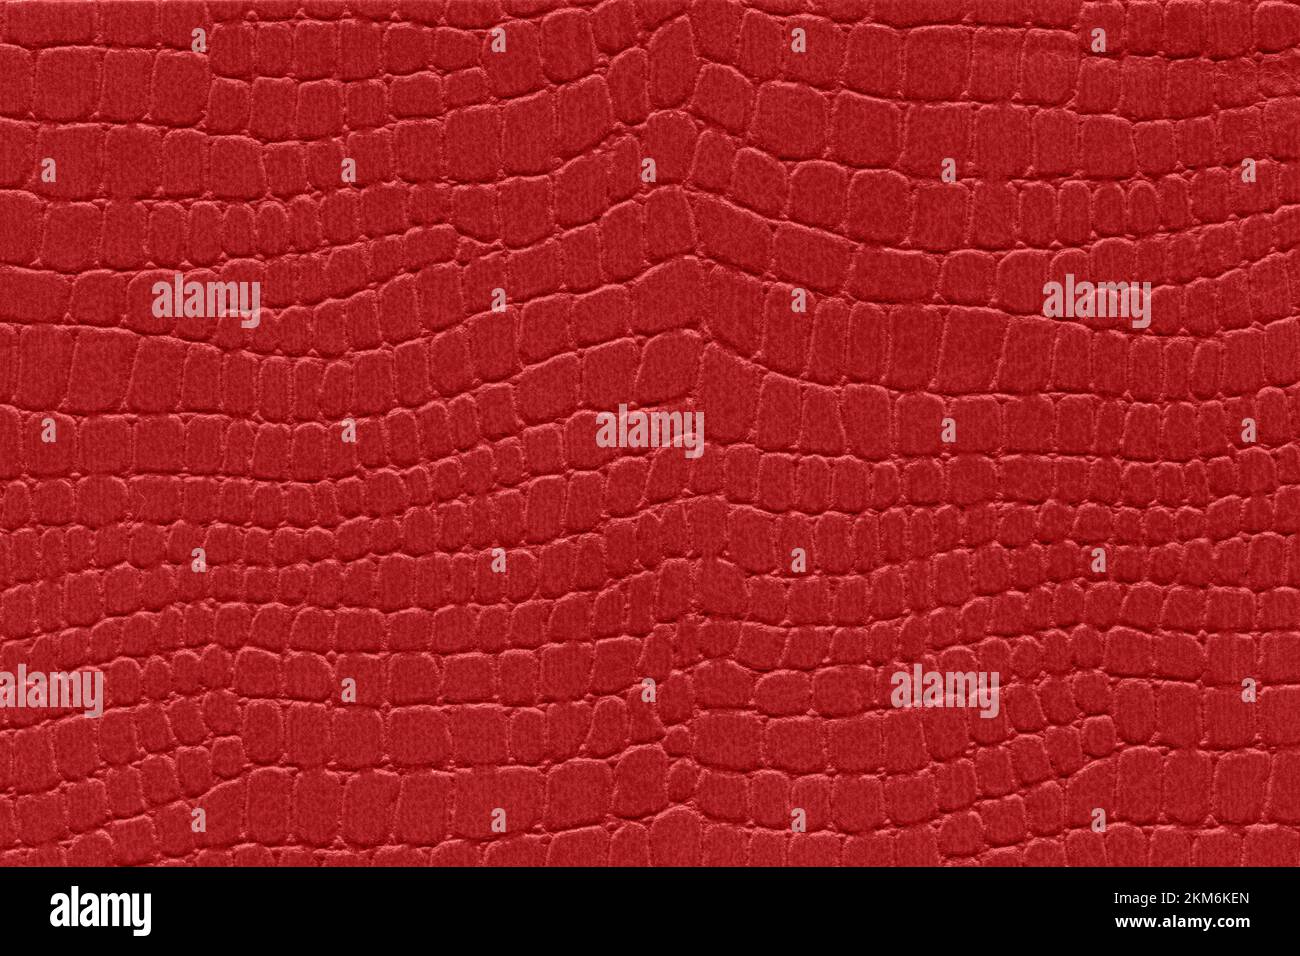 Red reptile skin. crocodile leather texture background Stock Photo